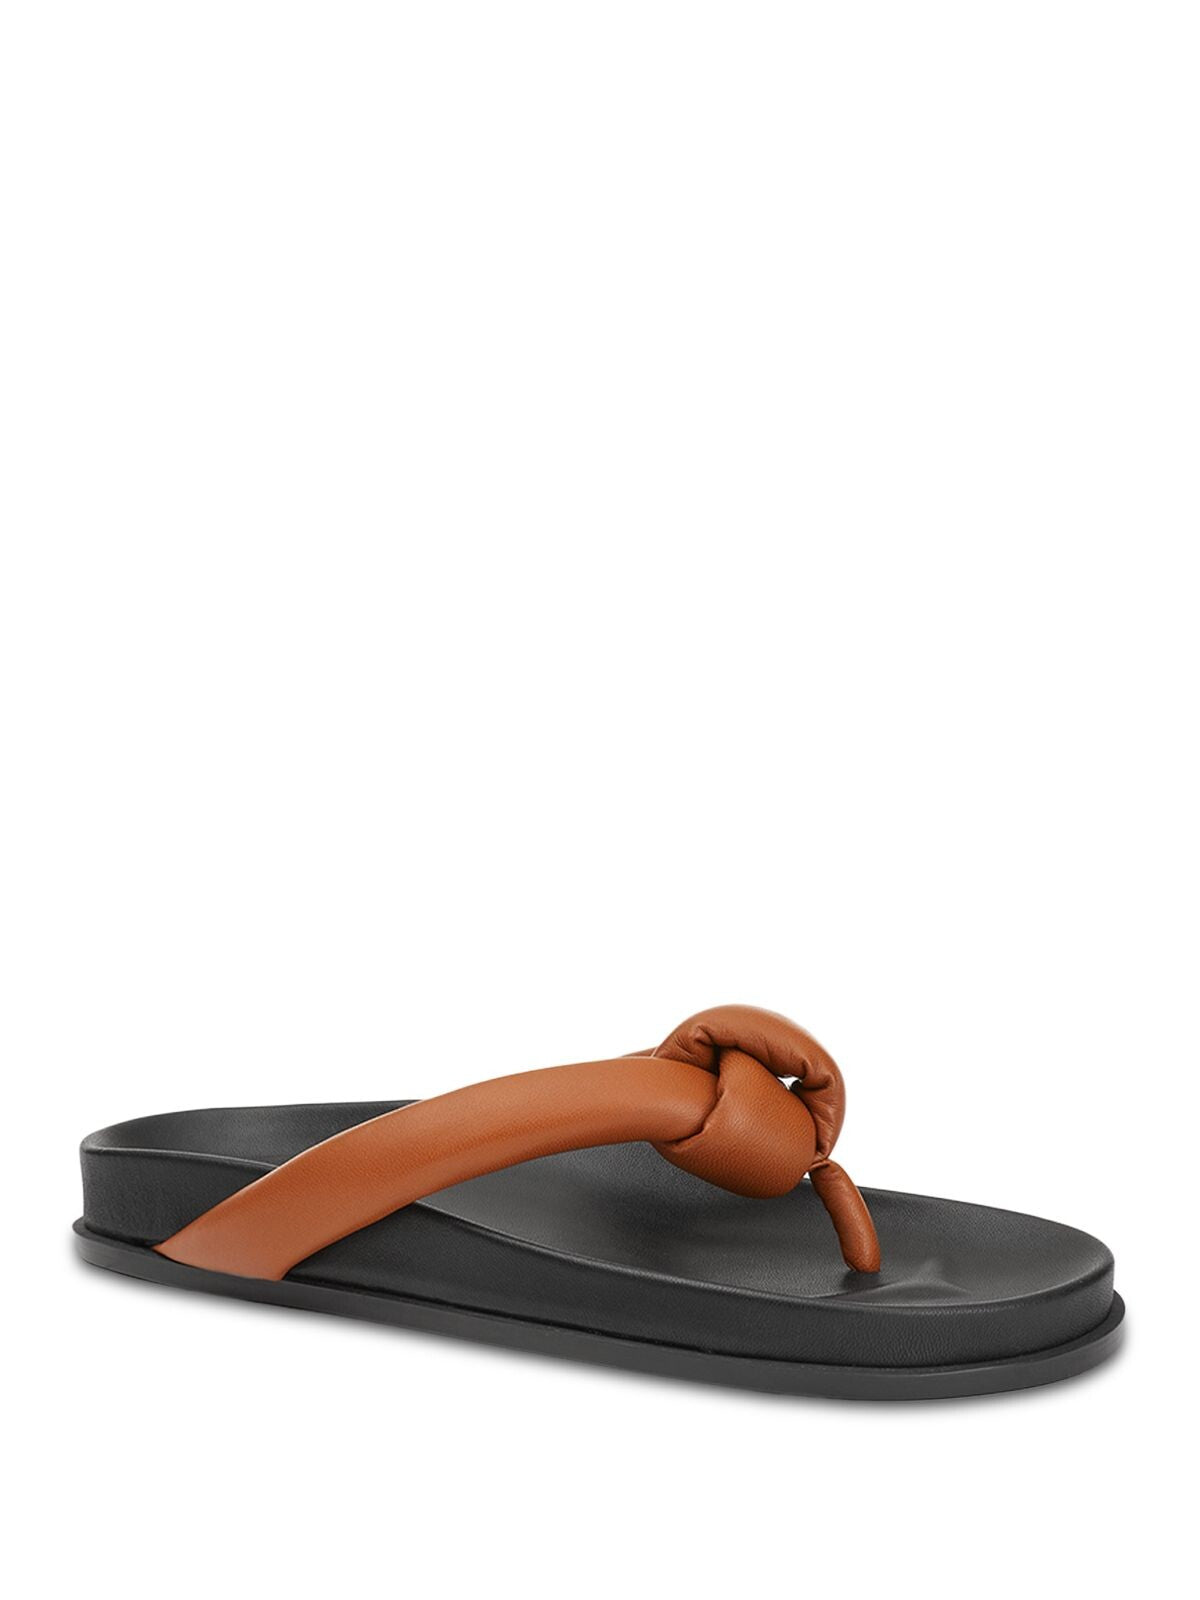 LAFAYETTE 148 NEW YORK Womens Brown Knotted Strap Molded Footbed Comfort Bristol Almond Toe Slip On Leather Thong Sandals Shoes 36.5